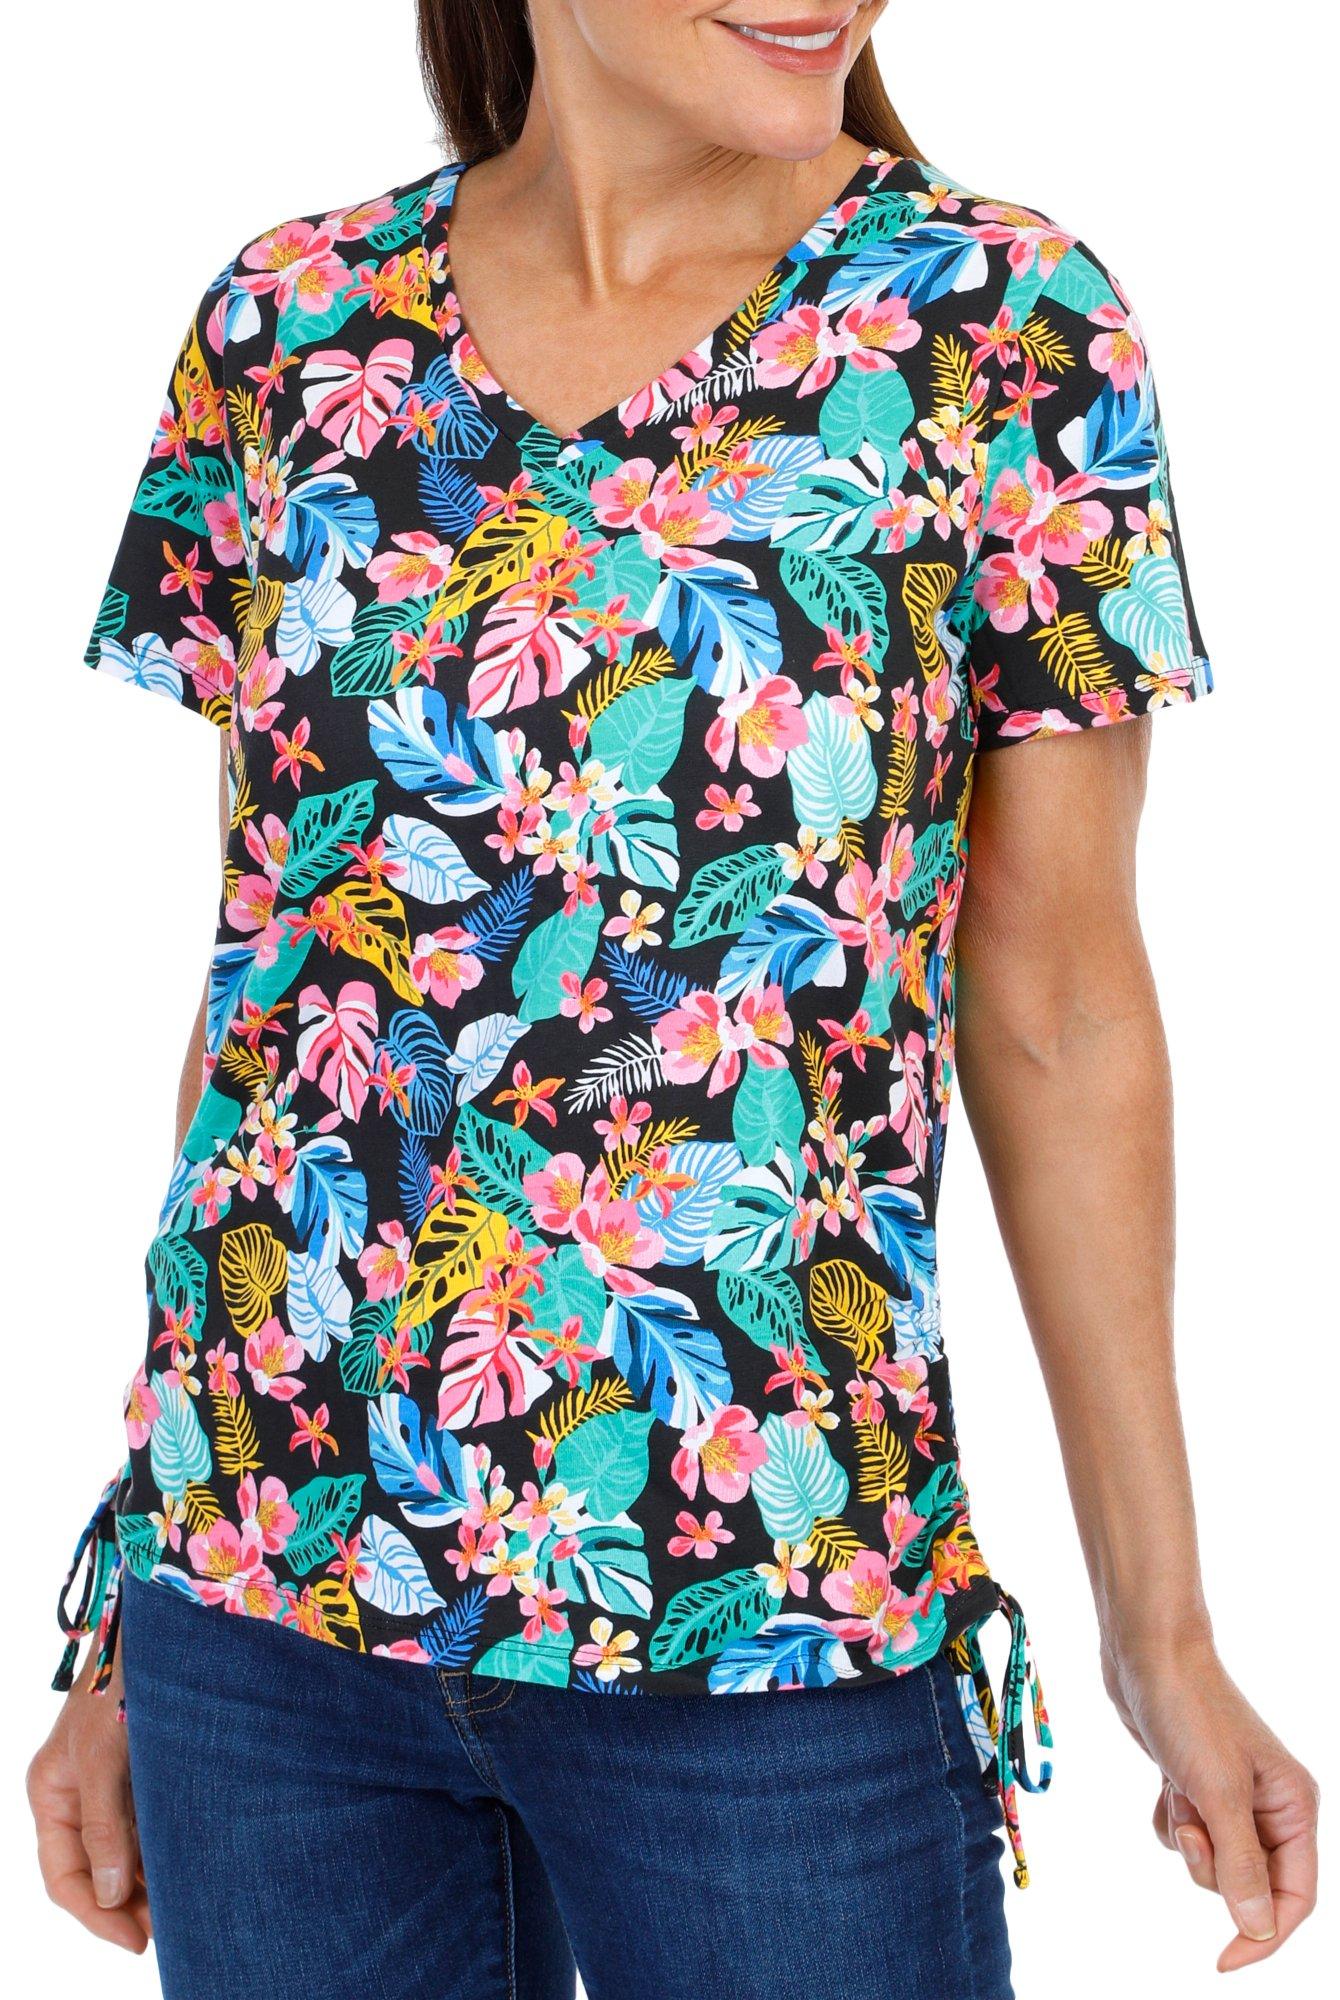 Women's Tropical Floral Short Sleeve Top